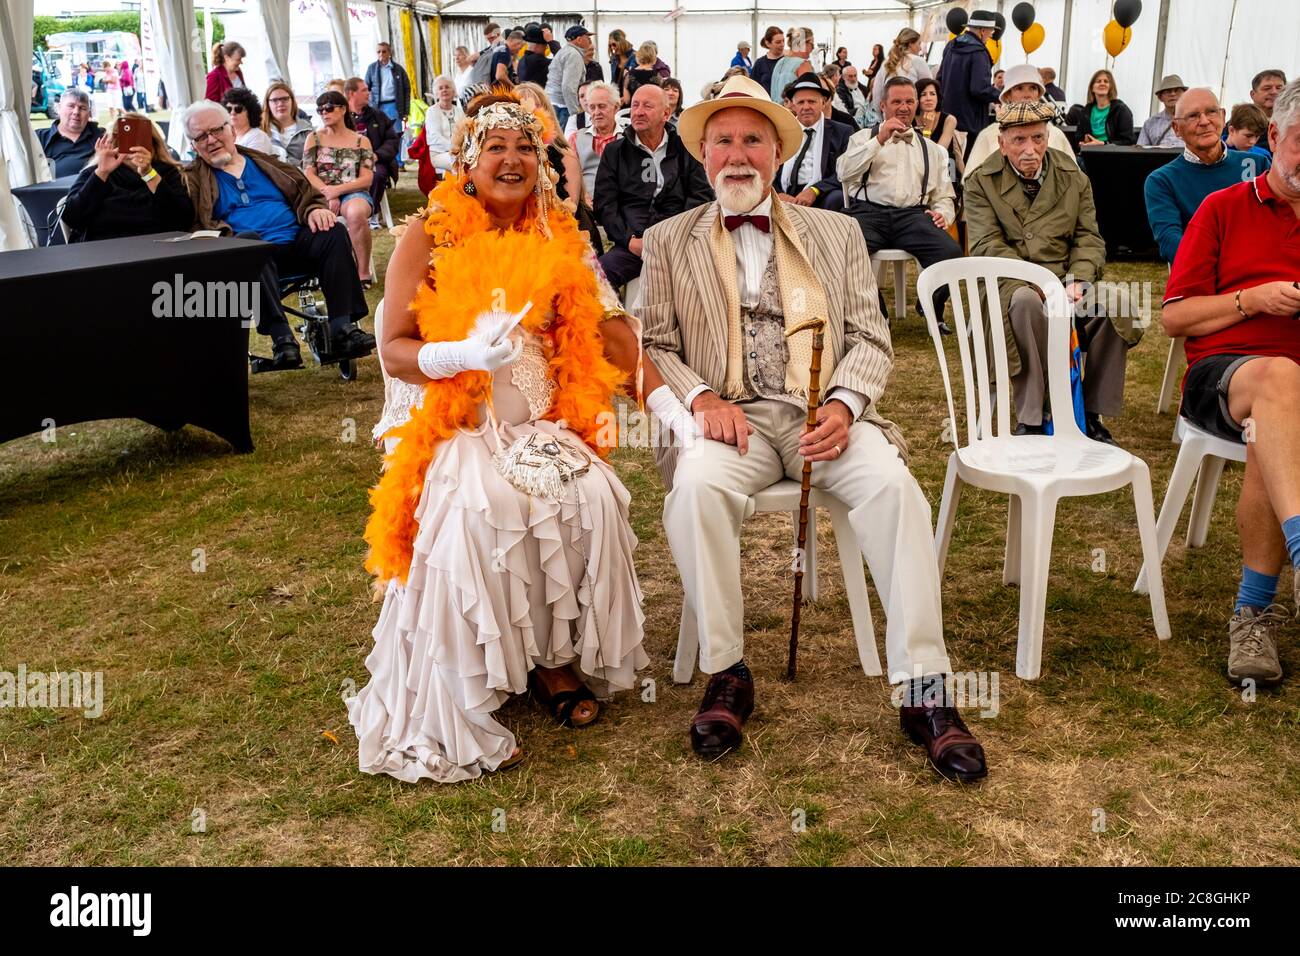 People Dressed In Period Costume At The Great Gatsby Fair, Bexhill on Sea, East Sussex, UK Stock Photo